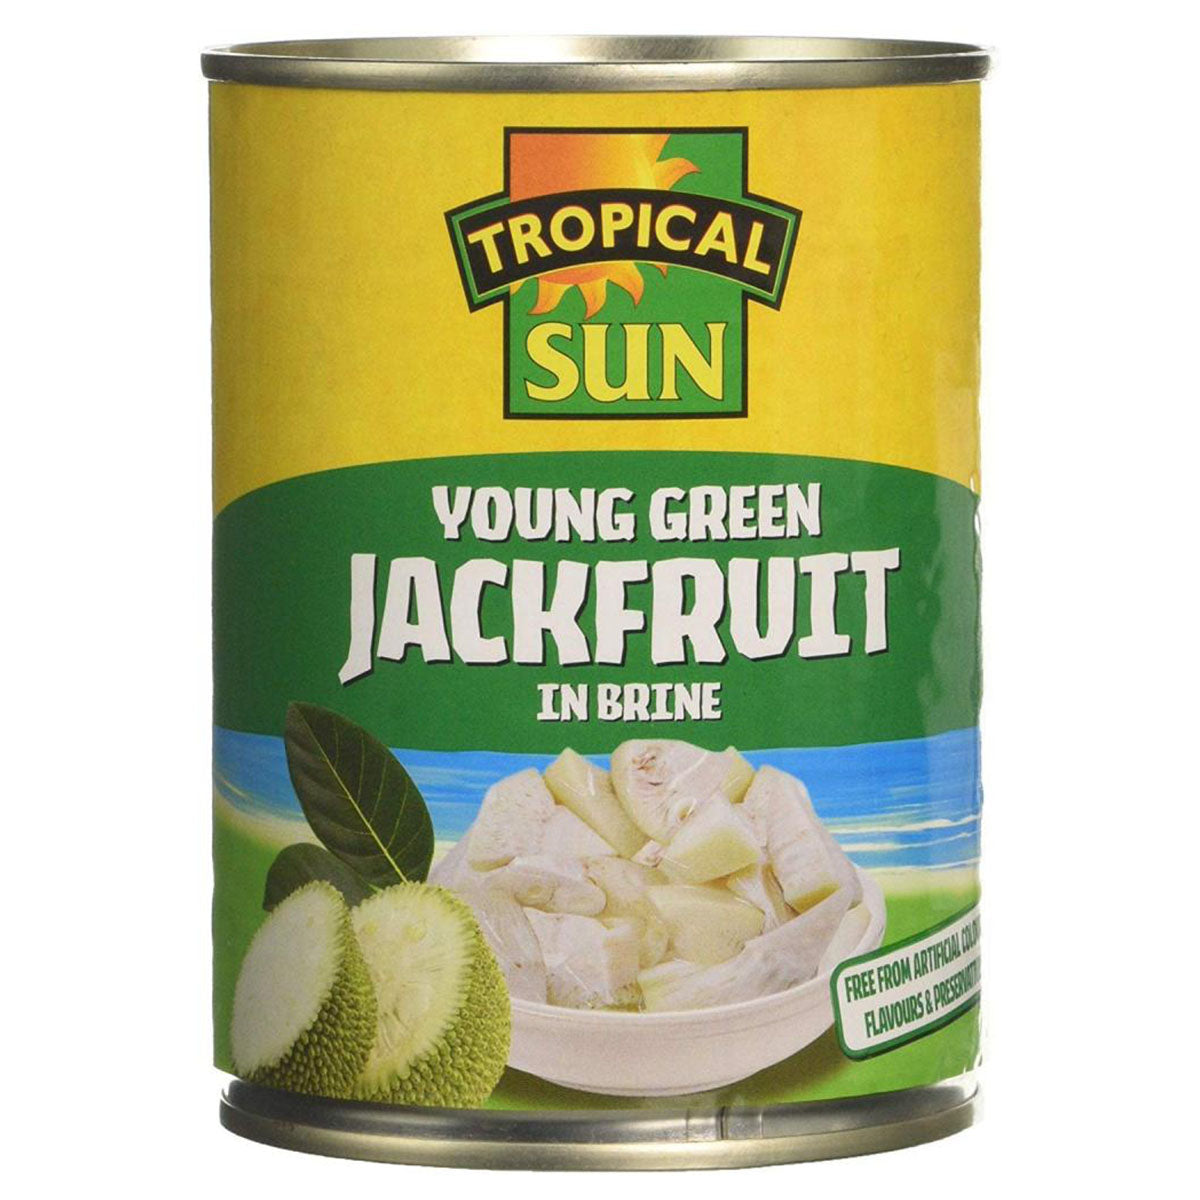 Tropical Sun - Young Green Jackfruit in Brine - 560g - Continental Food Store